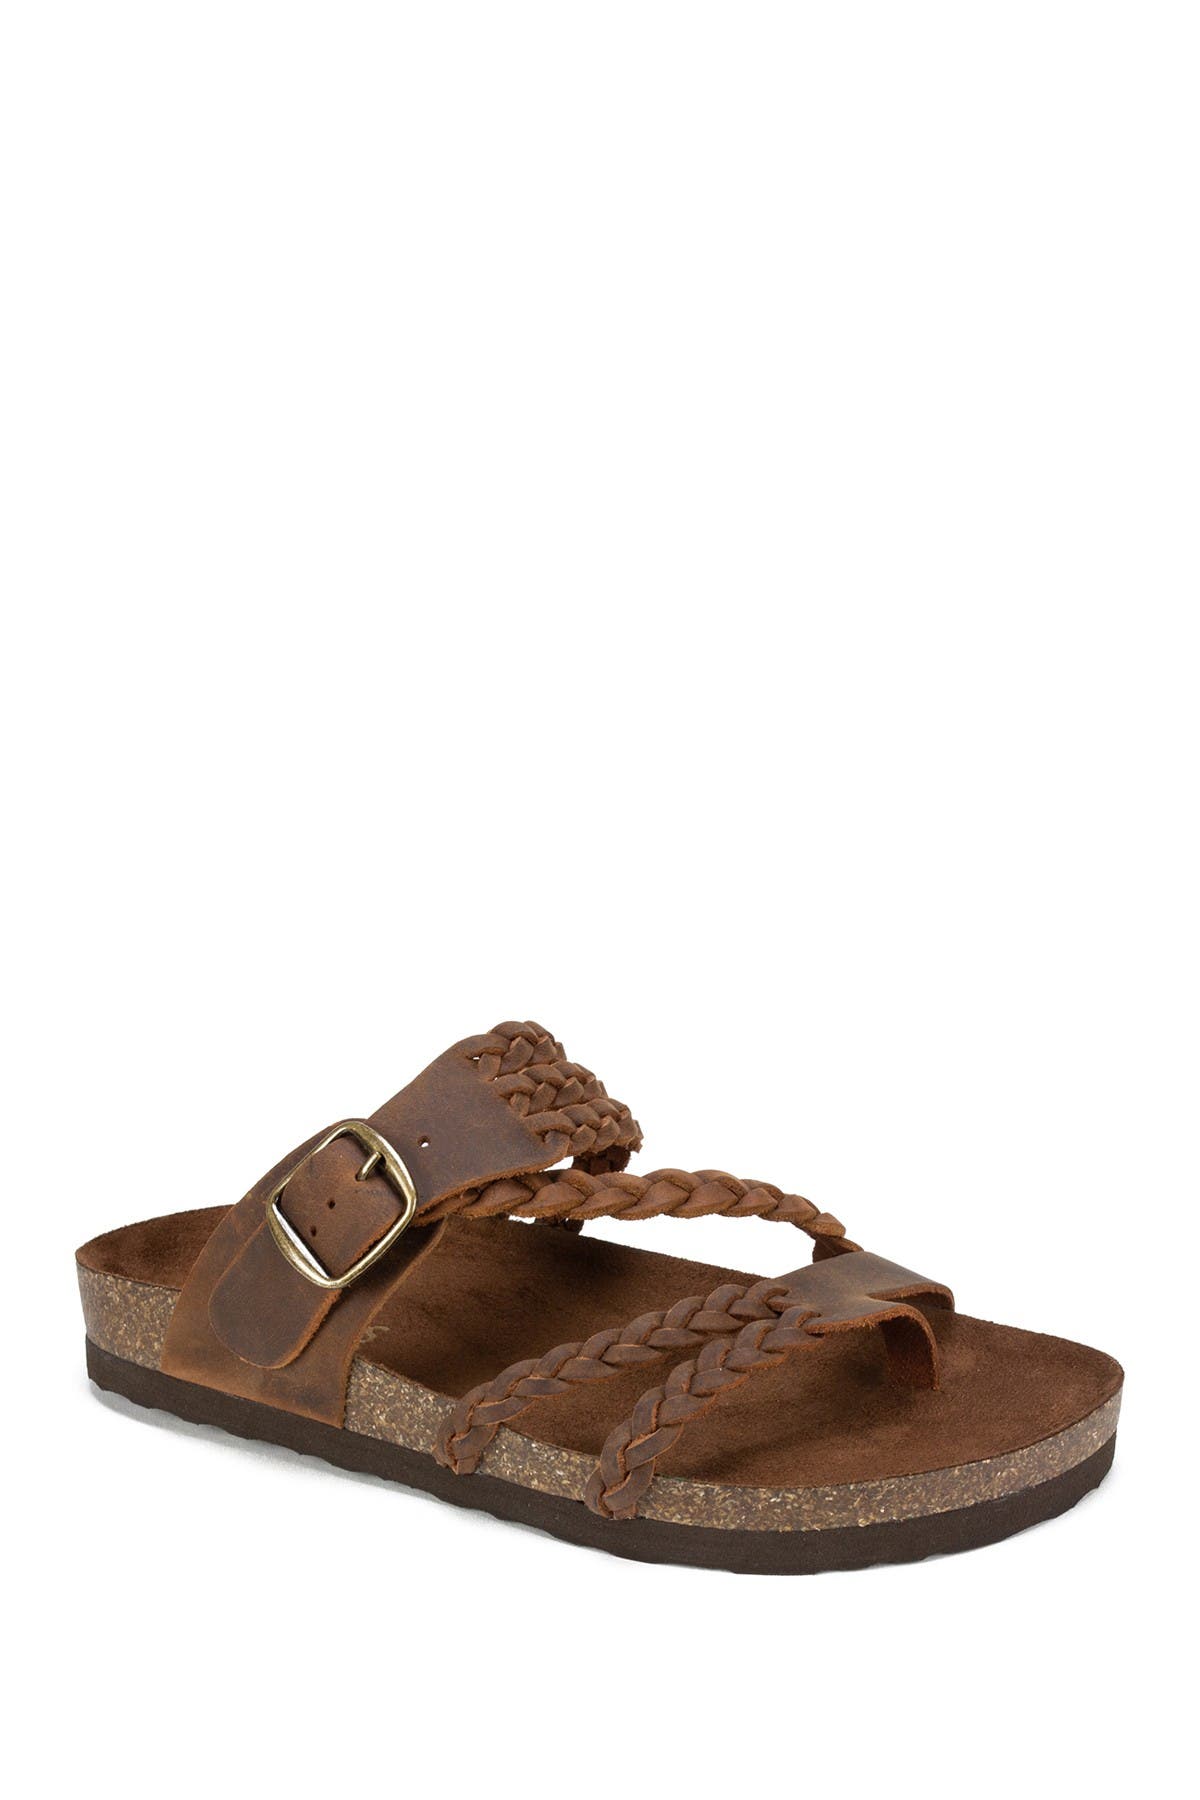 White Mountain Footwear Hayleigh Braided Leather Footbed Sandal In Brown/ Leather